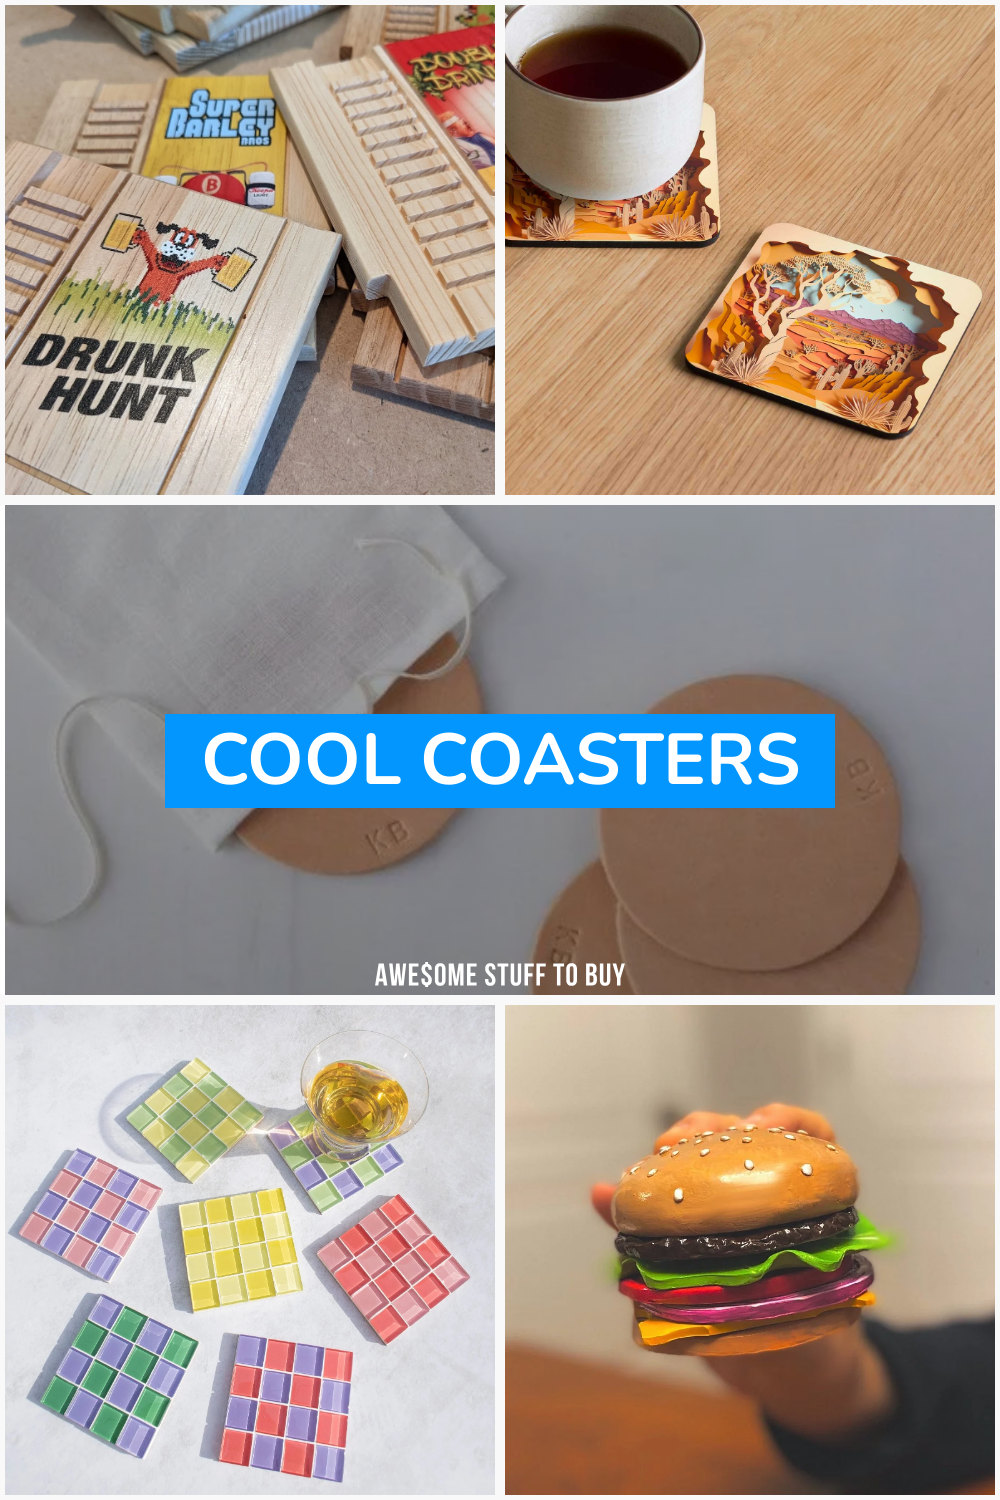 Cool Coasters // Awesome Stuff to Buy